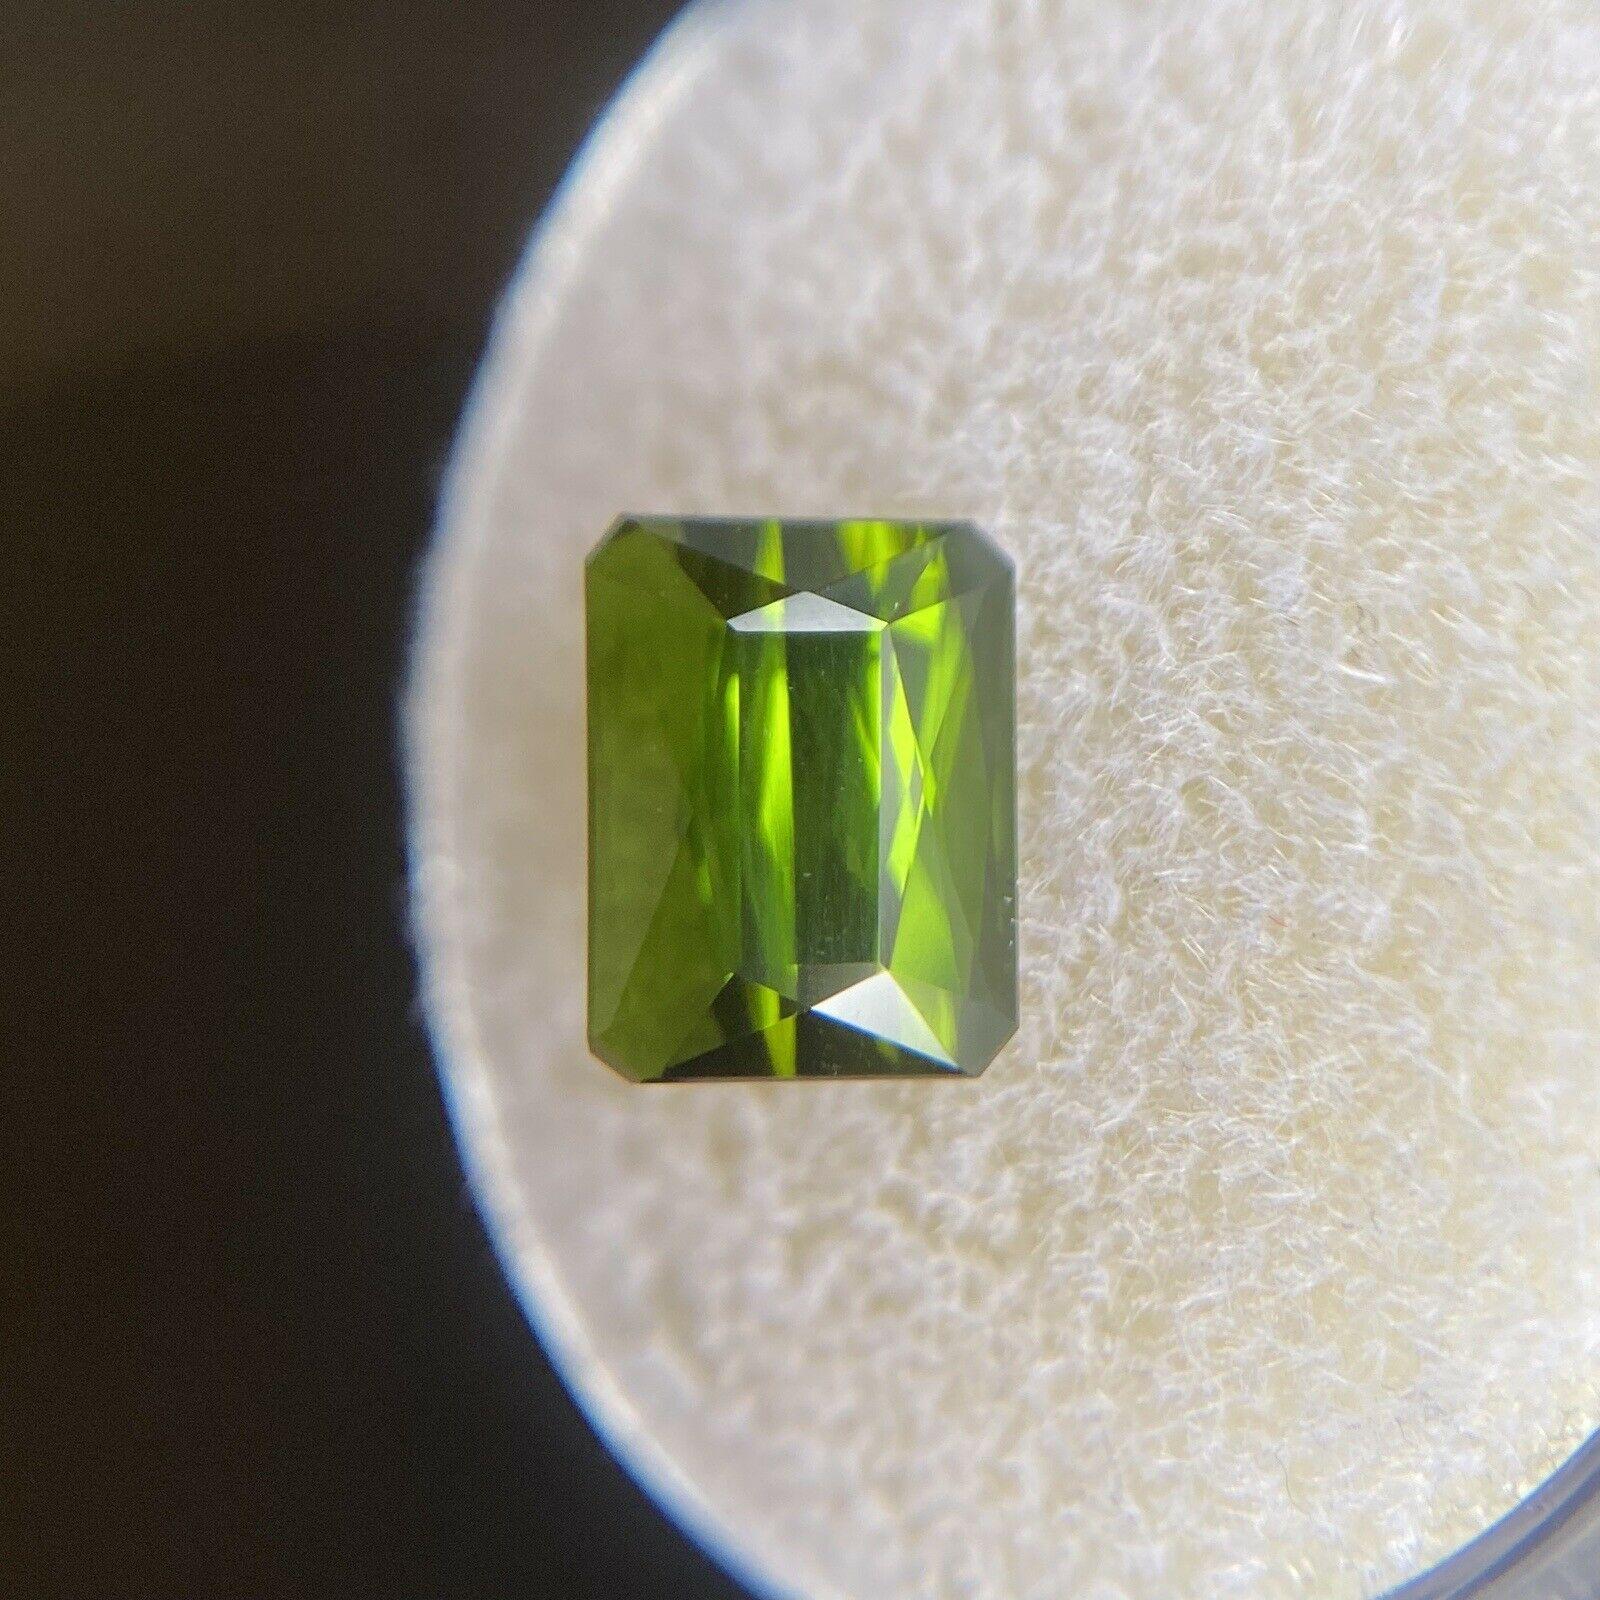 Fine Vivid Green Tourmaline 2.62ct Fancy Scissor Emerald Octagon Cut 8.4 x 6.5mm

Fine Vivid Green Tourmaline Gemstone. 
2.62 Carat with a beautiful and vibrant vivid green colour and very good clarity, clean stone with only some small natural